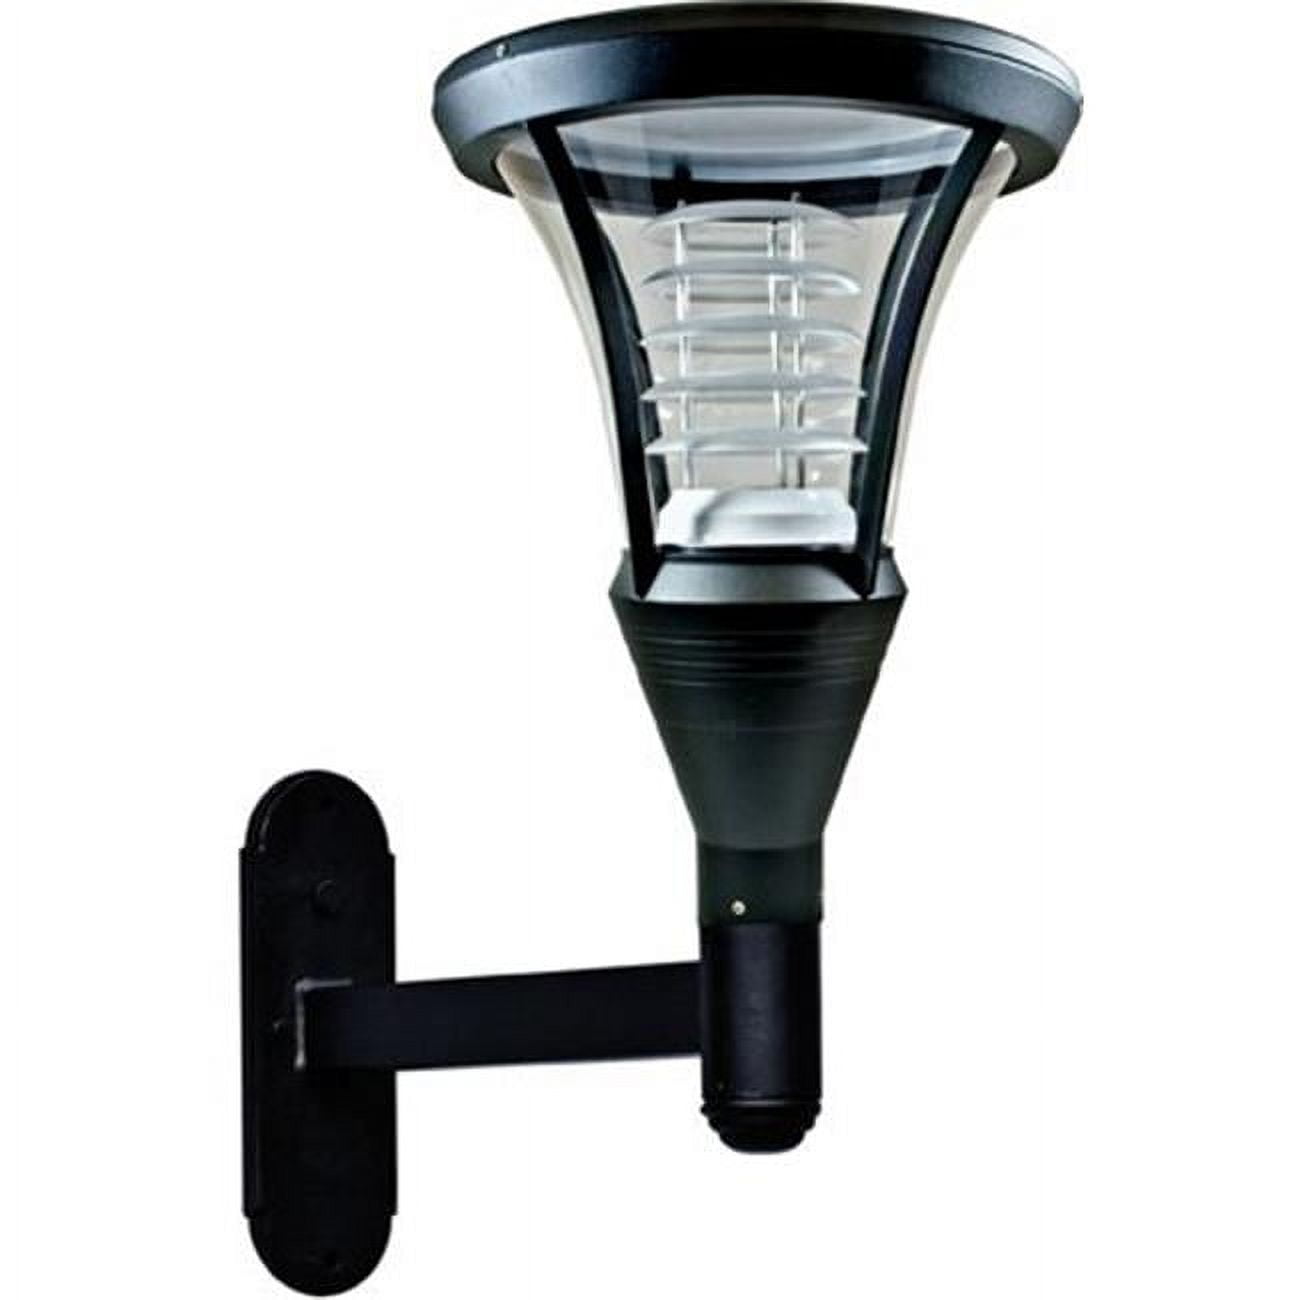 Picture of Dabmar Lighting GM631-B 35W 120V Powder Coated Cast Aluminum Wall Light Fixture with High Pressure Sodium Lamp, Black